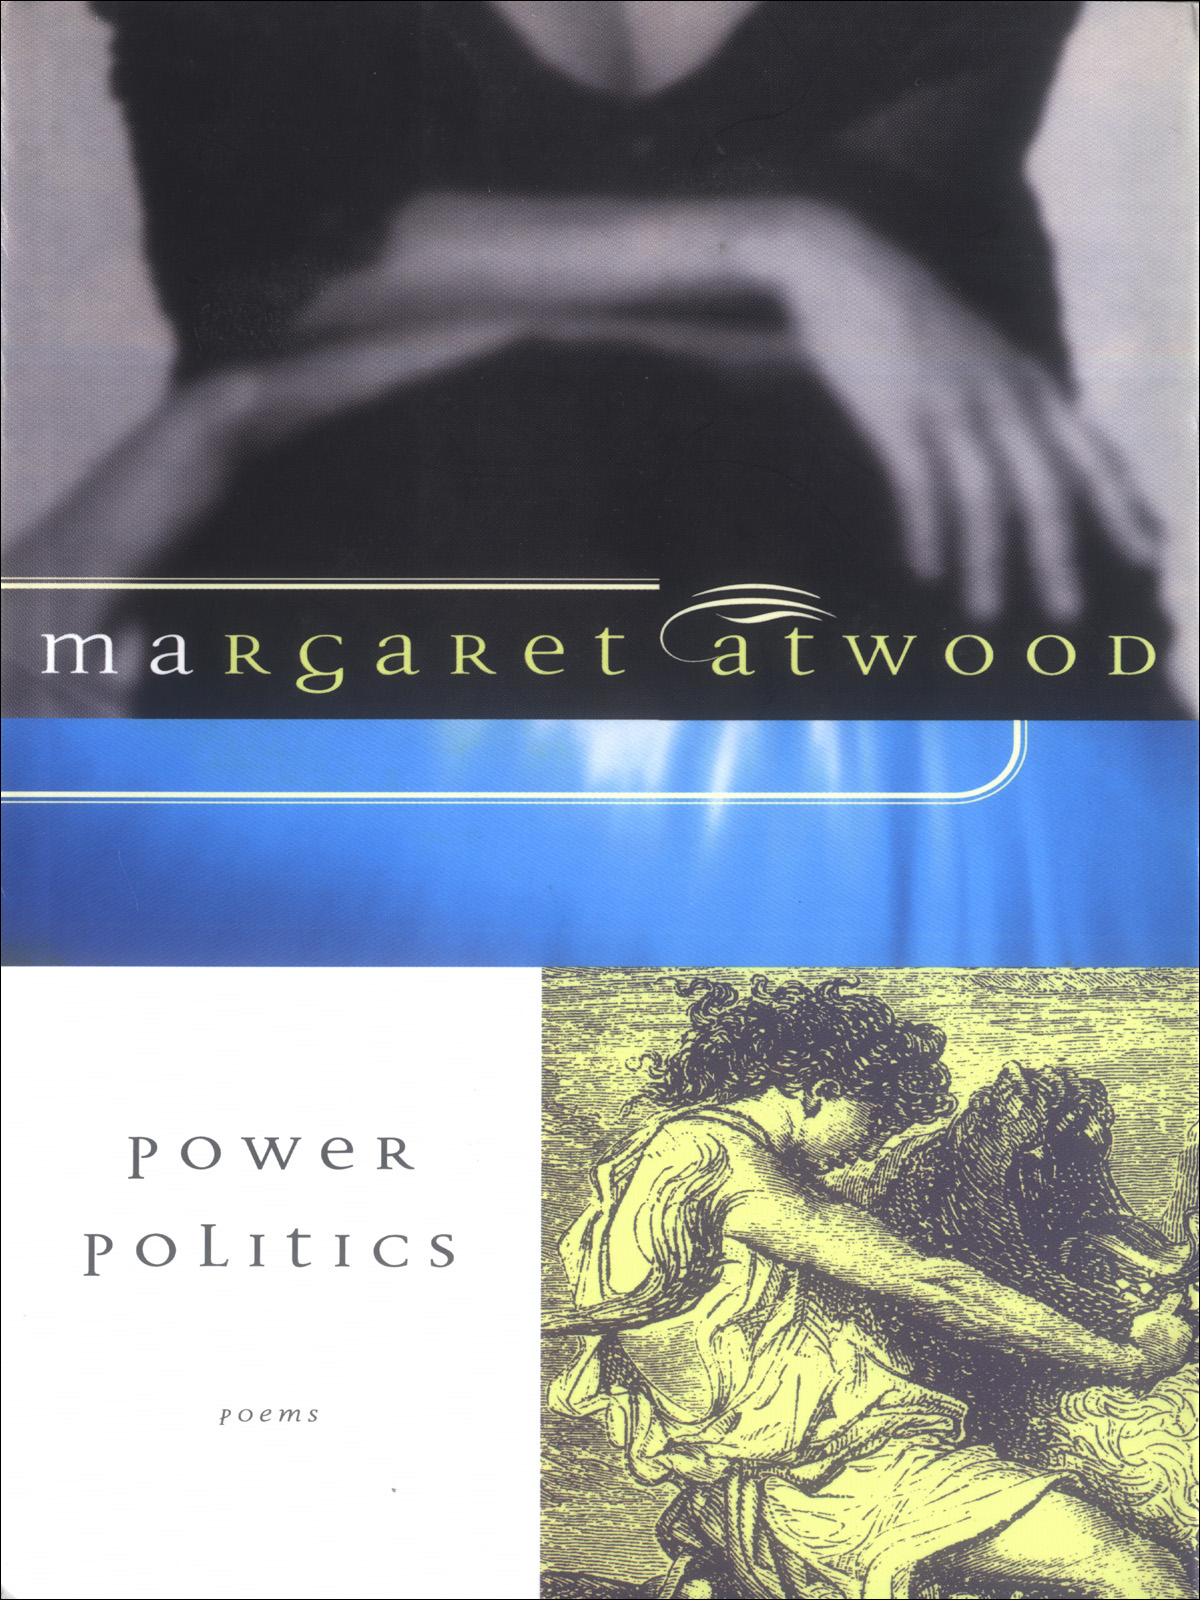 Power Politics by Margaret Atwood